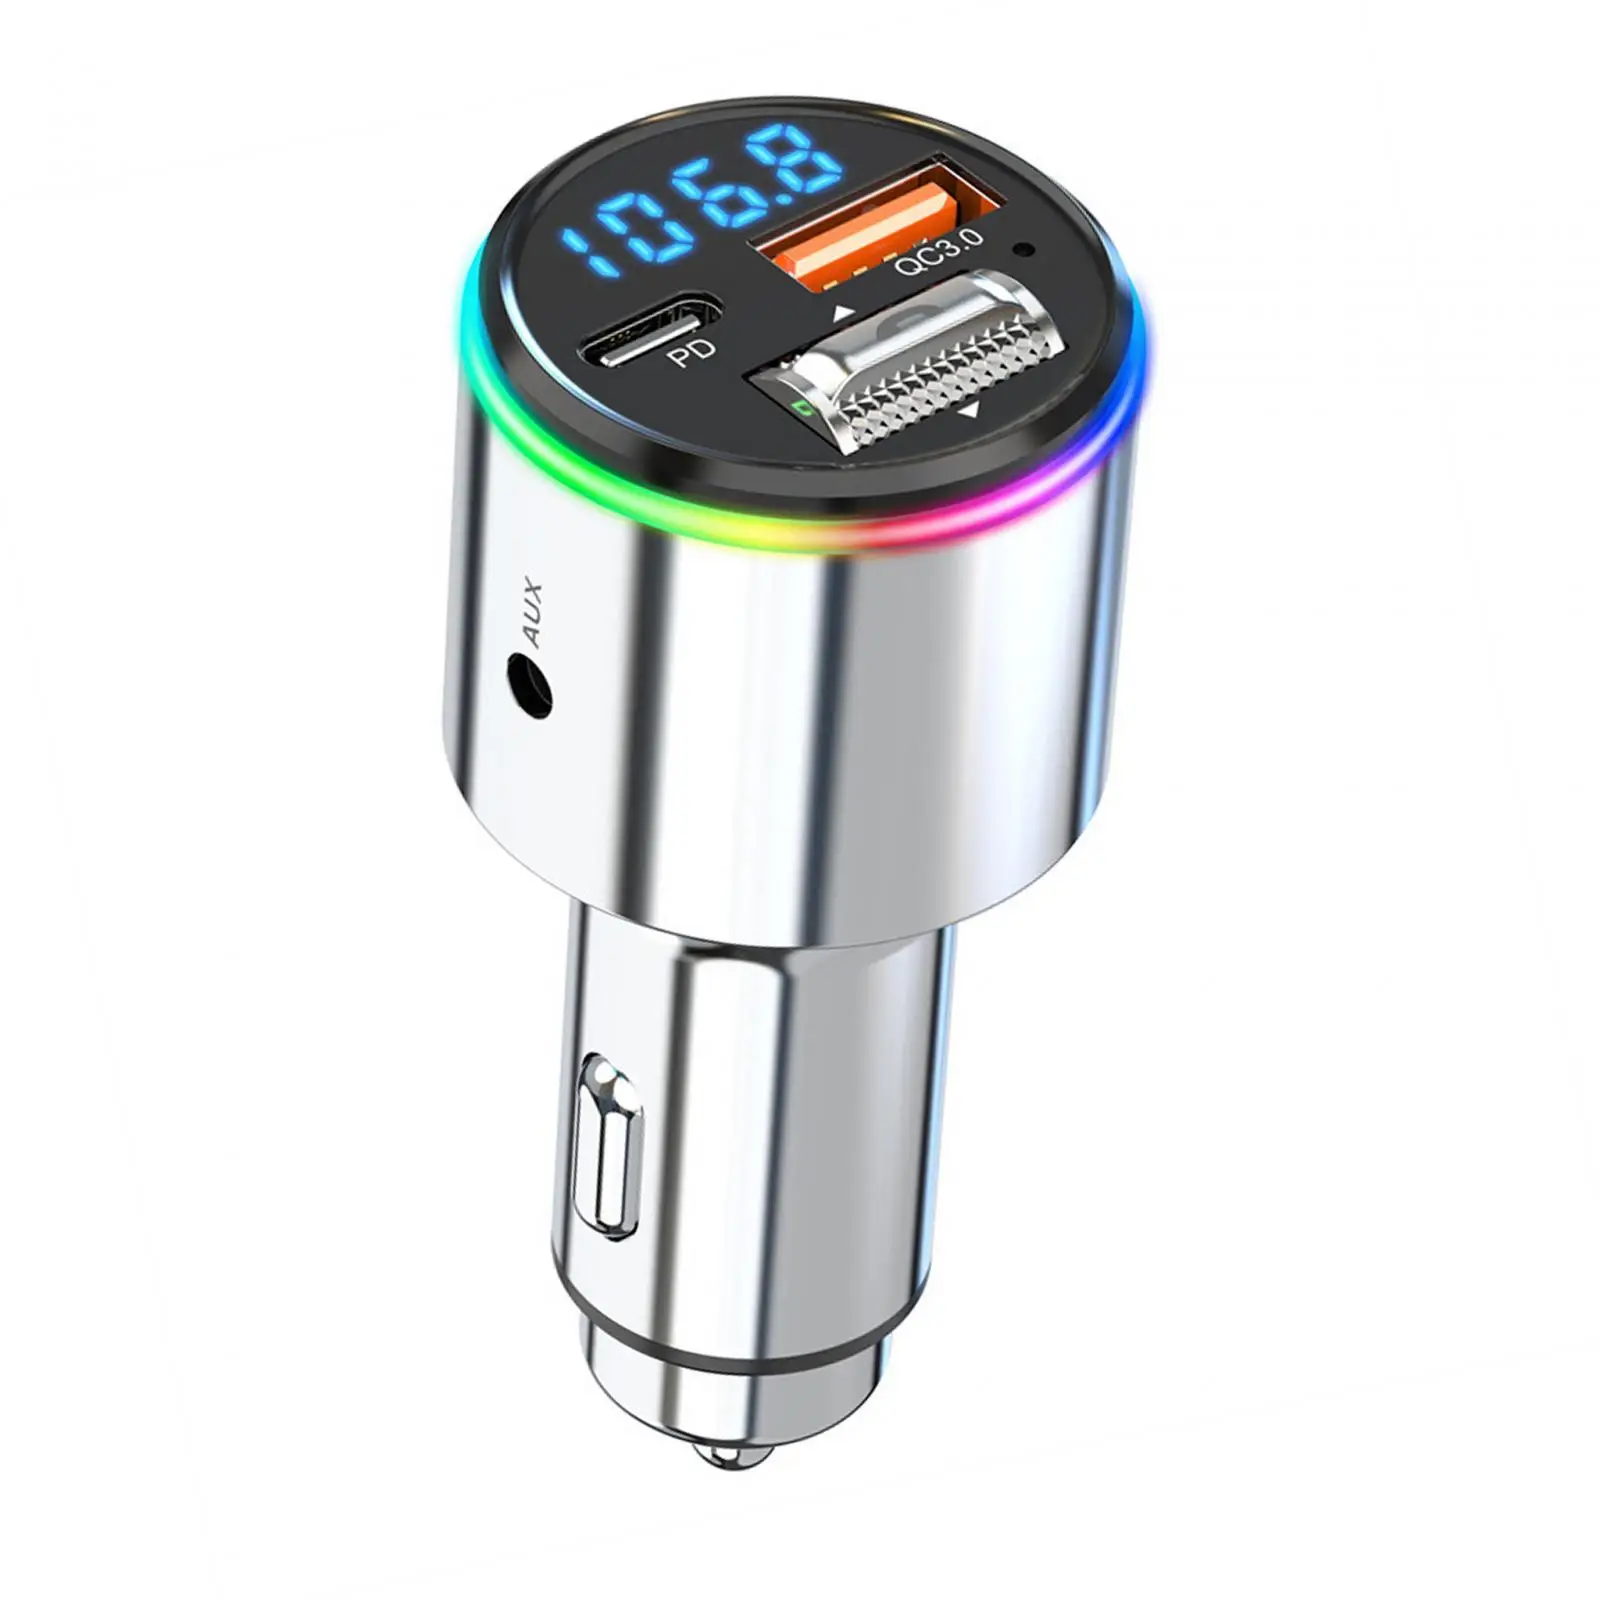 V5.3 FM Transmitter for Car BC1.2 Afc Bass Boost Hands Free Calling with RGB Color Bluetooth Car Adapter for SUV Car Truck